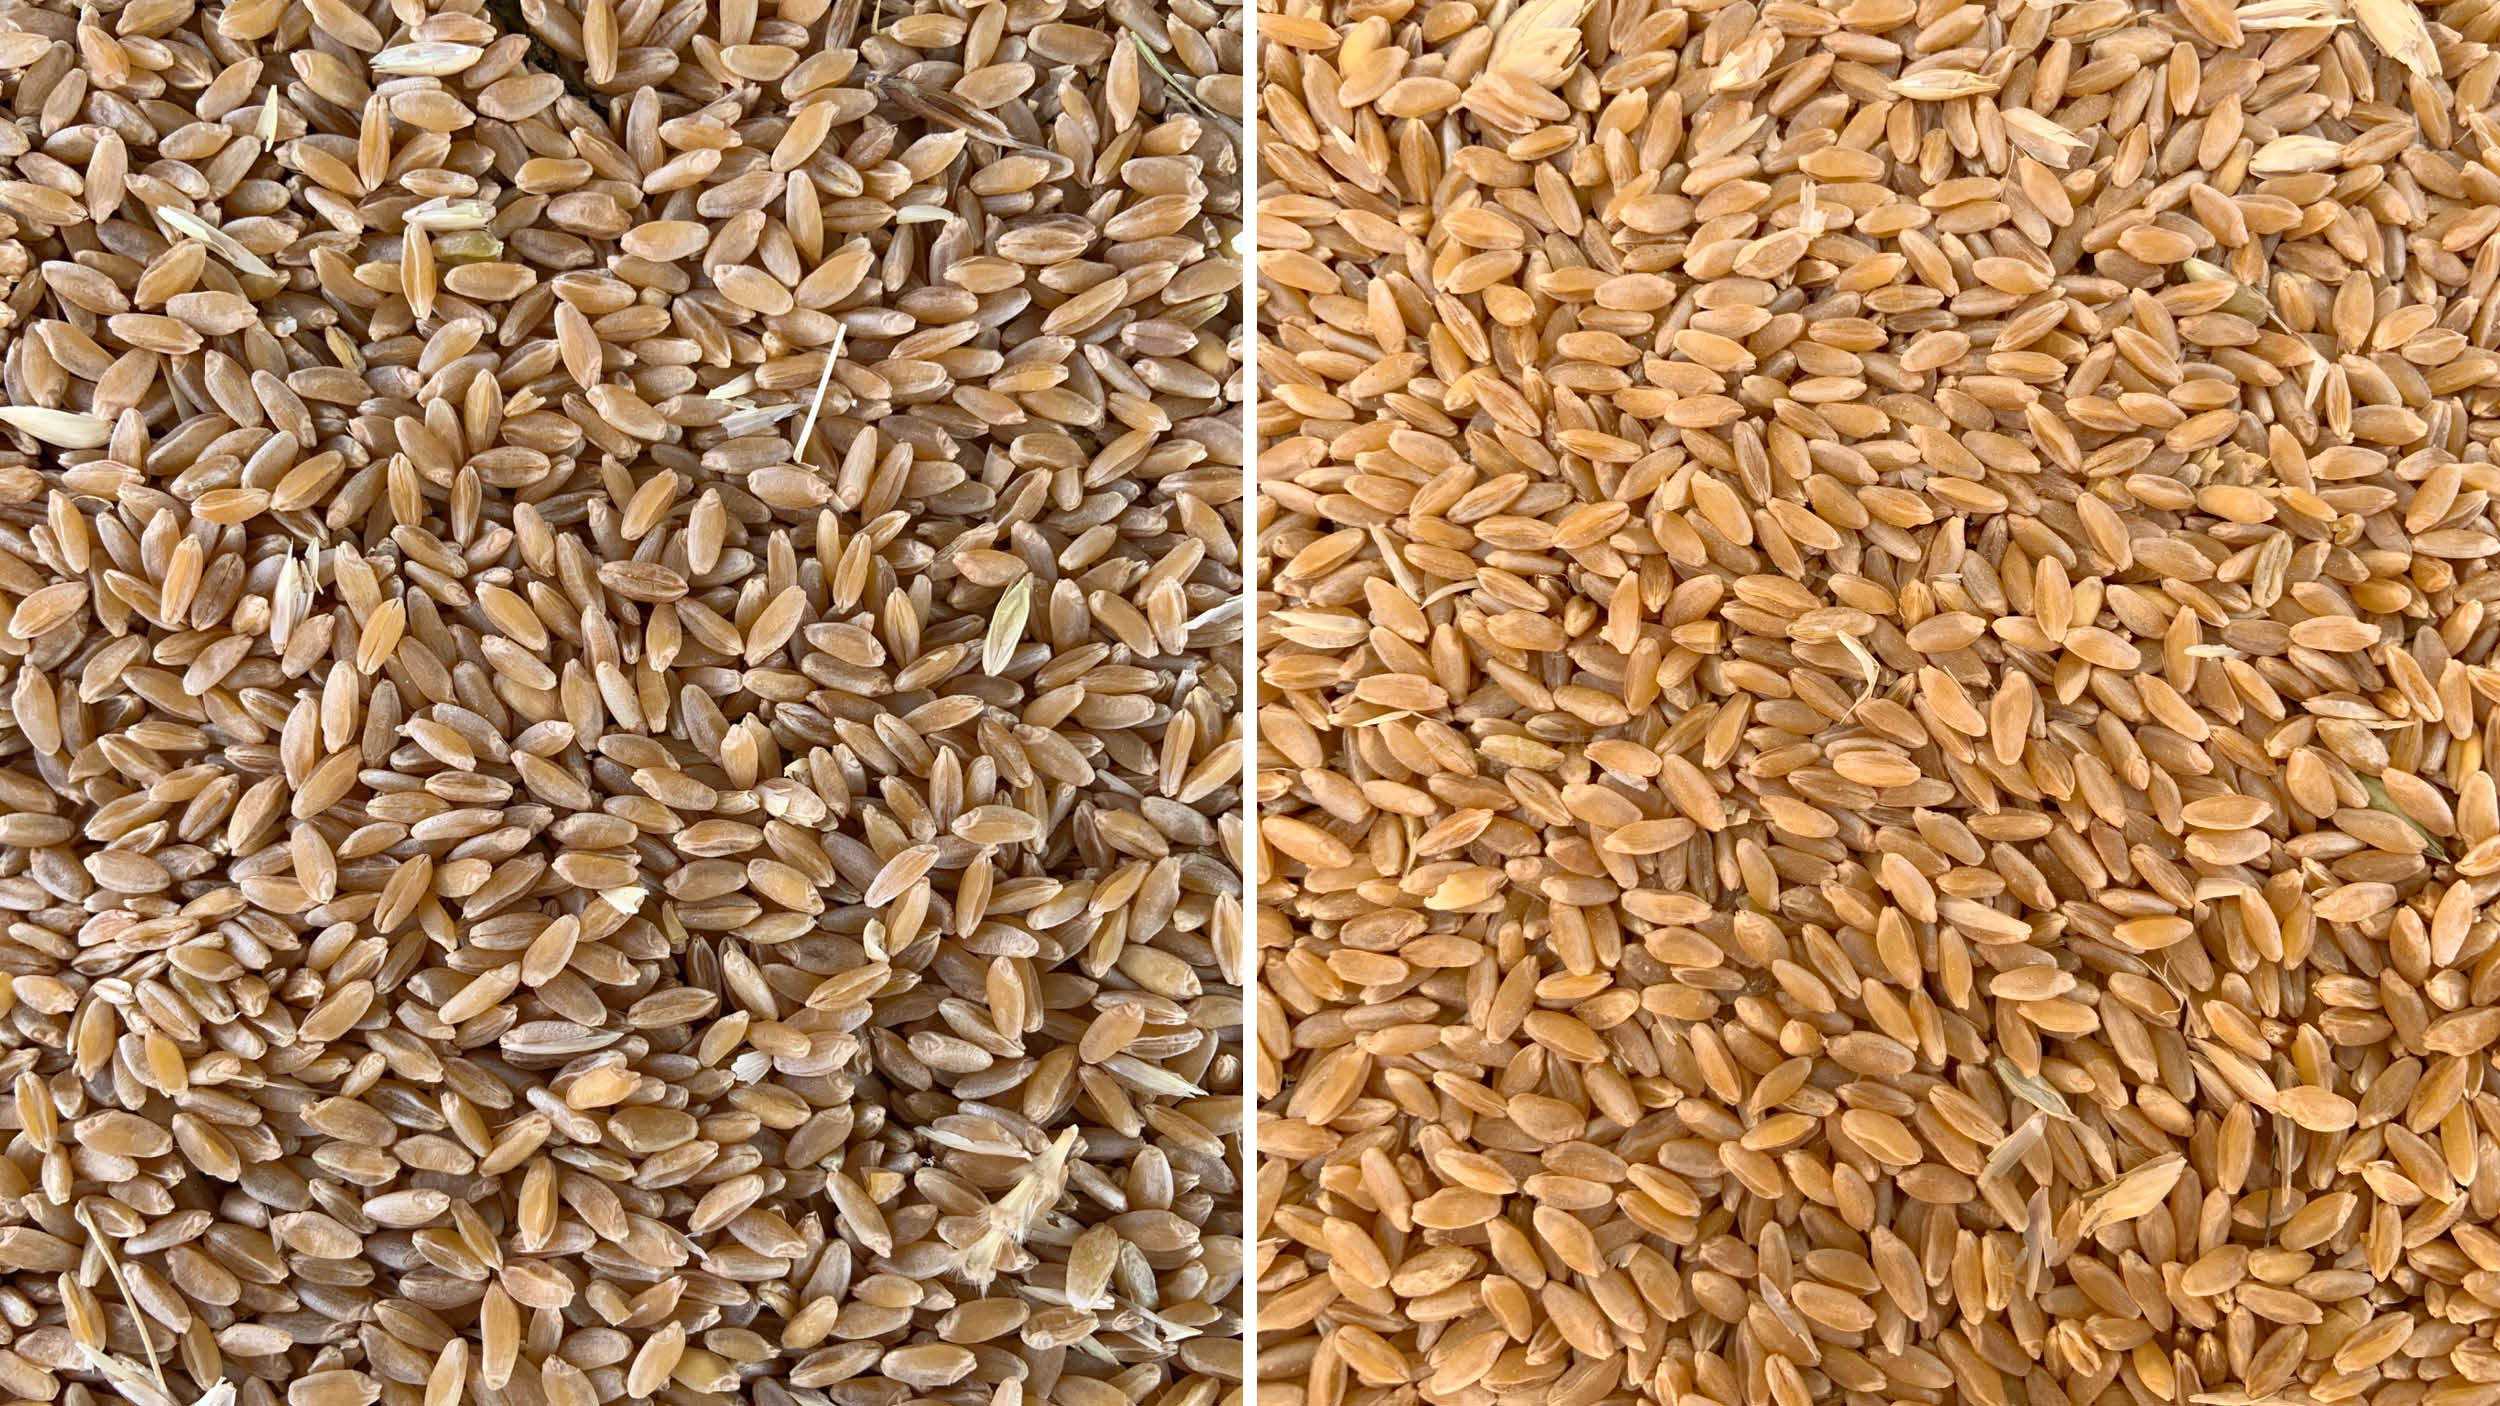 Durum wheat before & after being dried